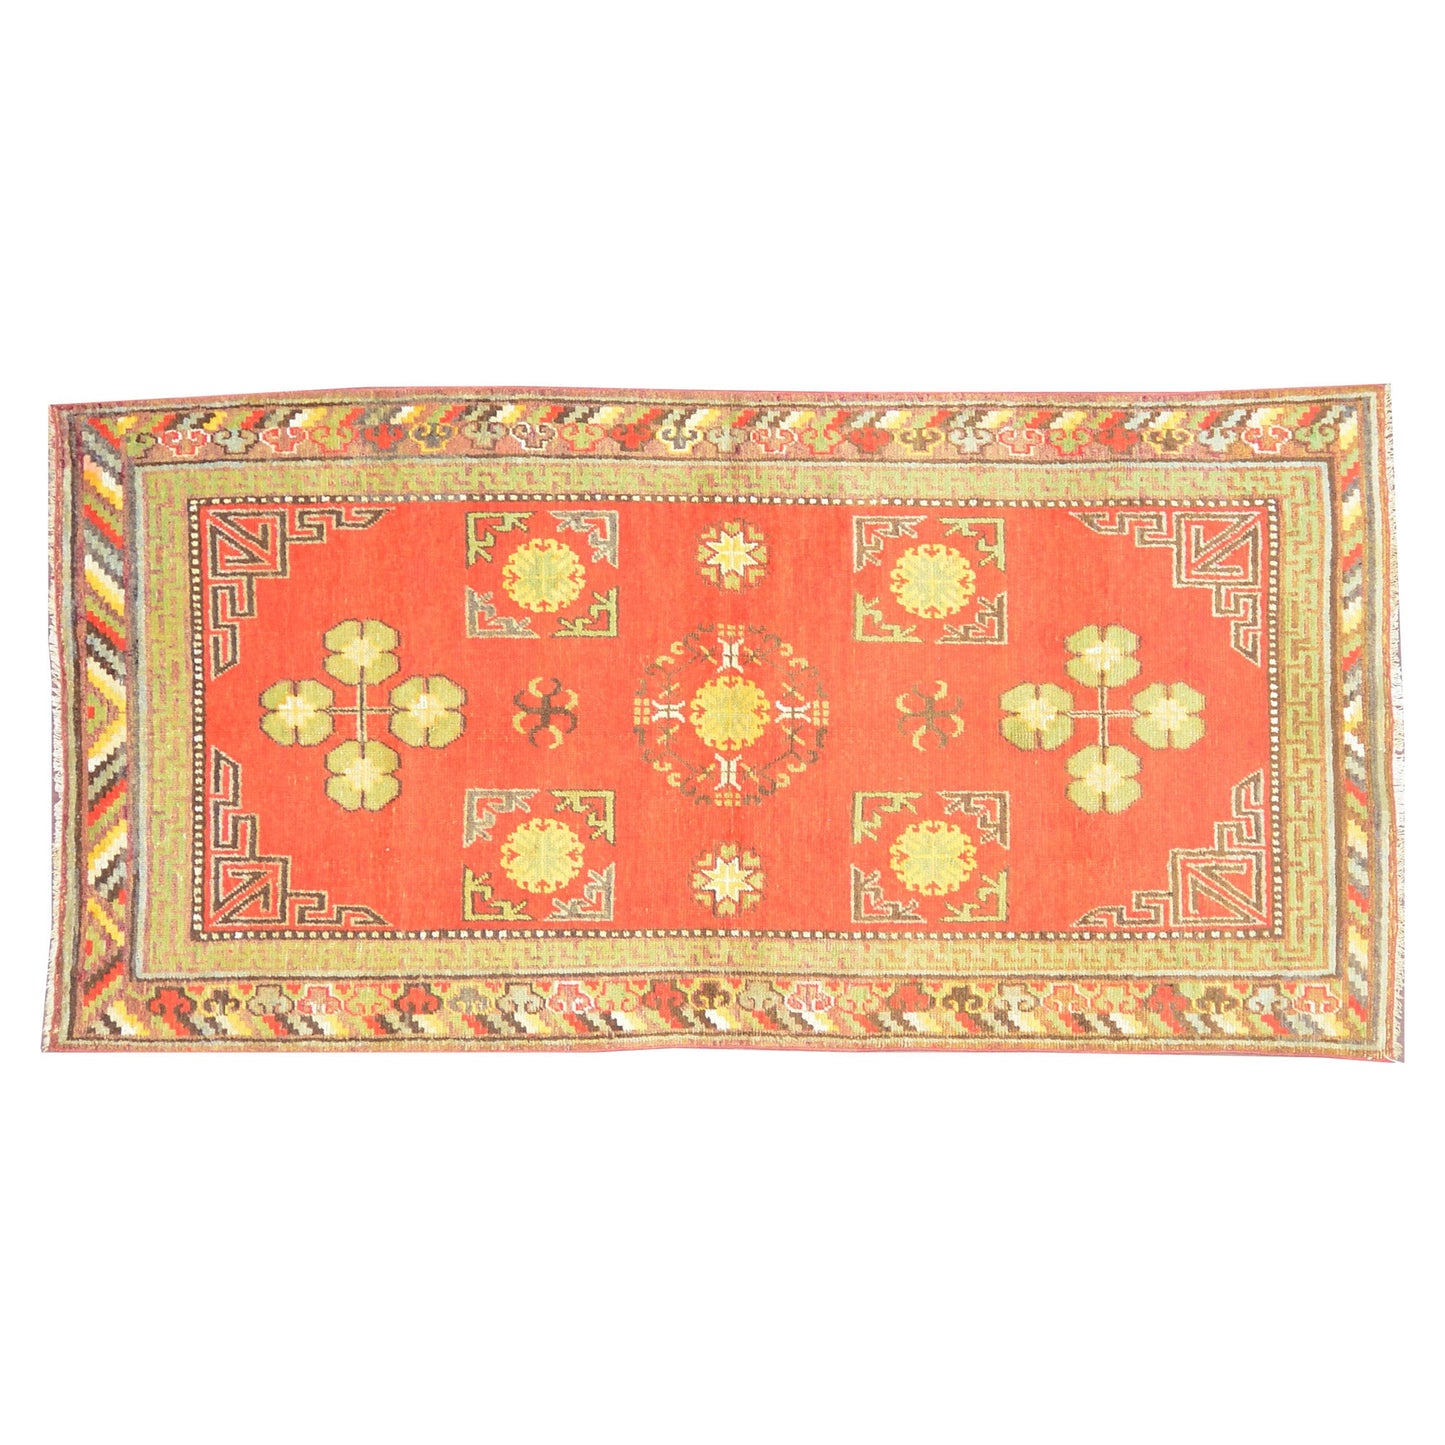 Get trendy with Rust Green Antique Khotan Handknotted Rug 4.1x8.2ft 125x249cms - Tribal Rugs available at Jaipur Oriental Rugs. Grab yours for $1828.75 today!